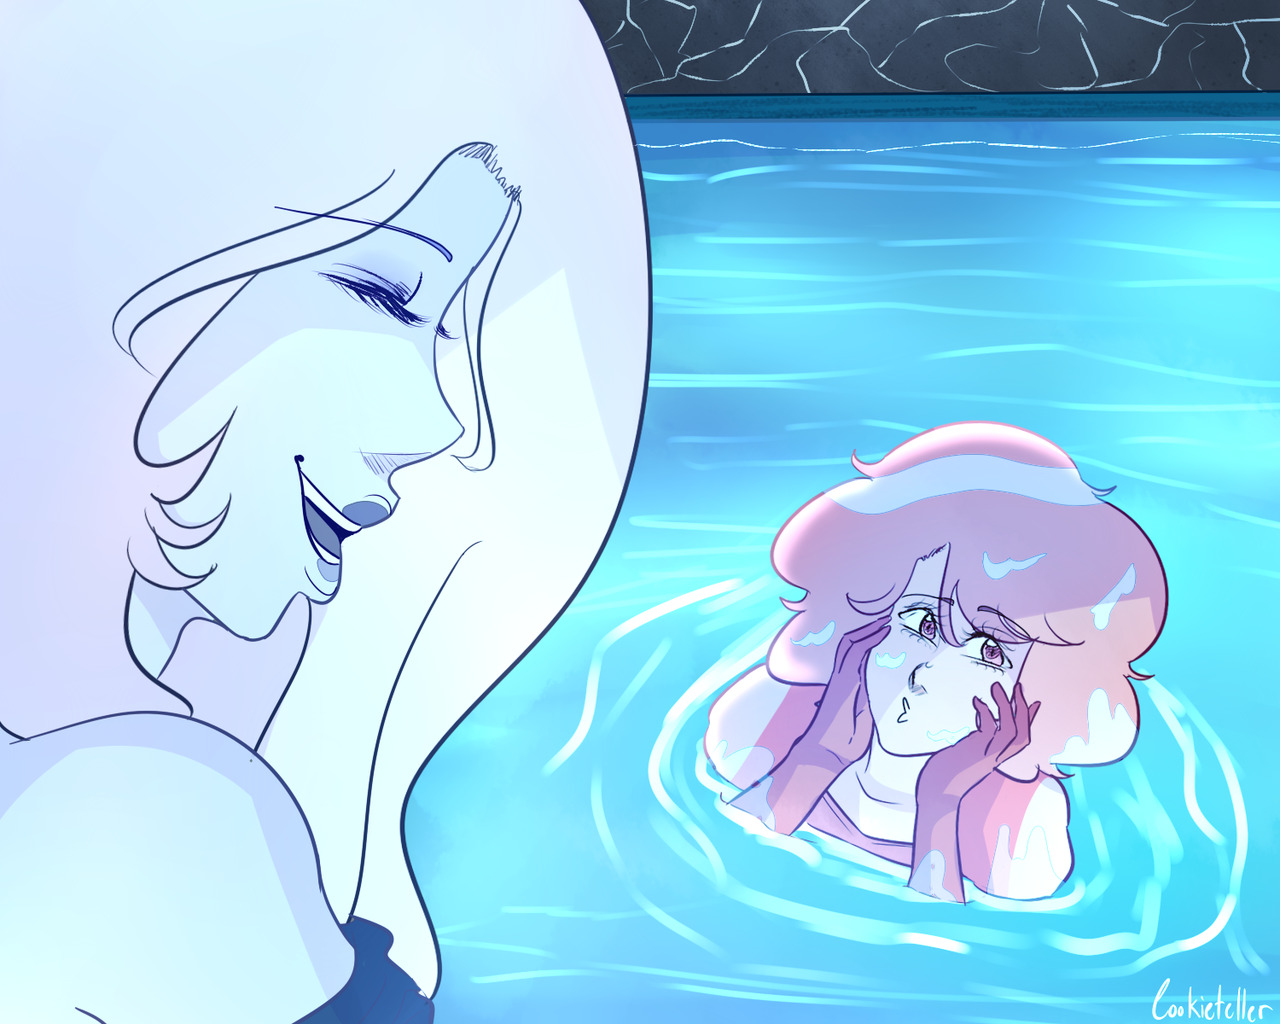 Pink Diamond making her other fellow Diamonds laugh except for White cuz she be mysterious af